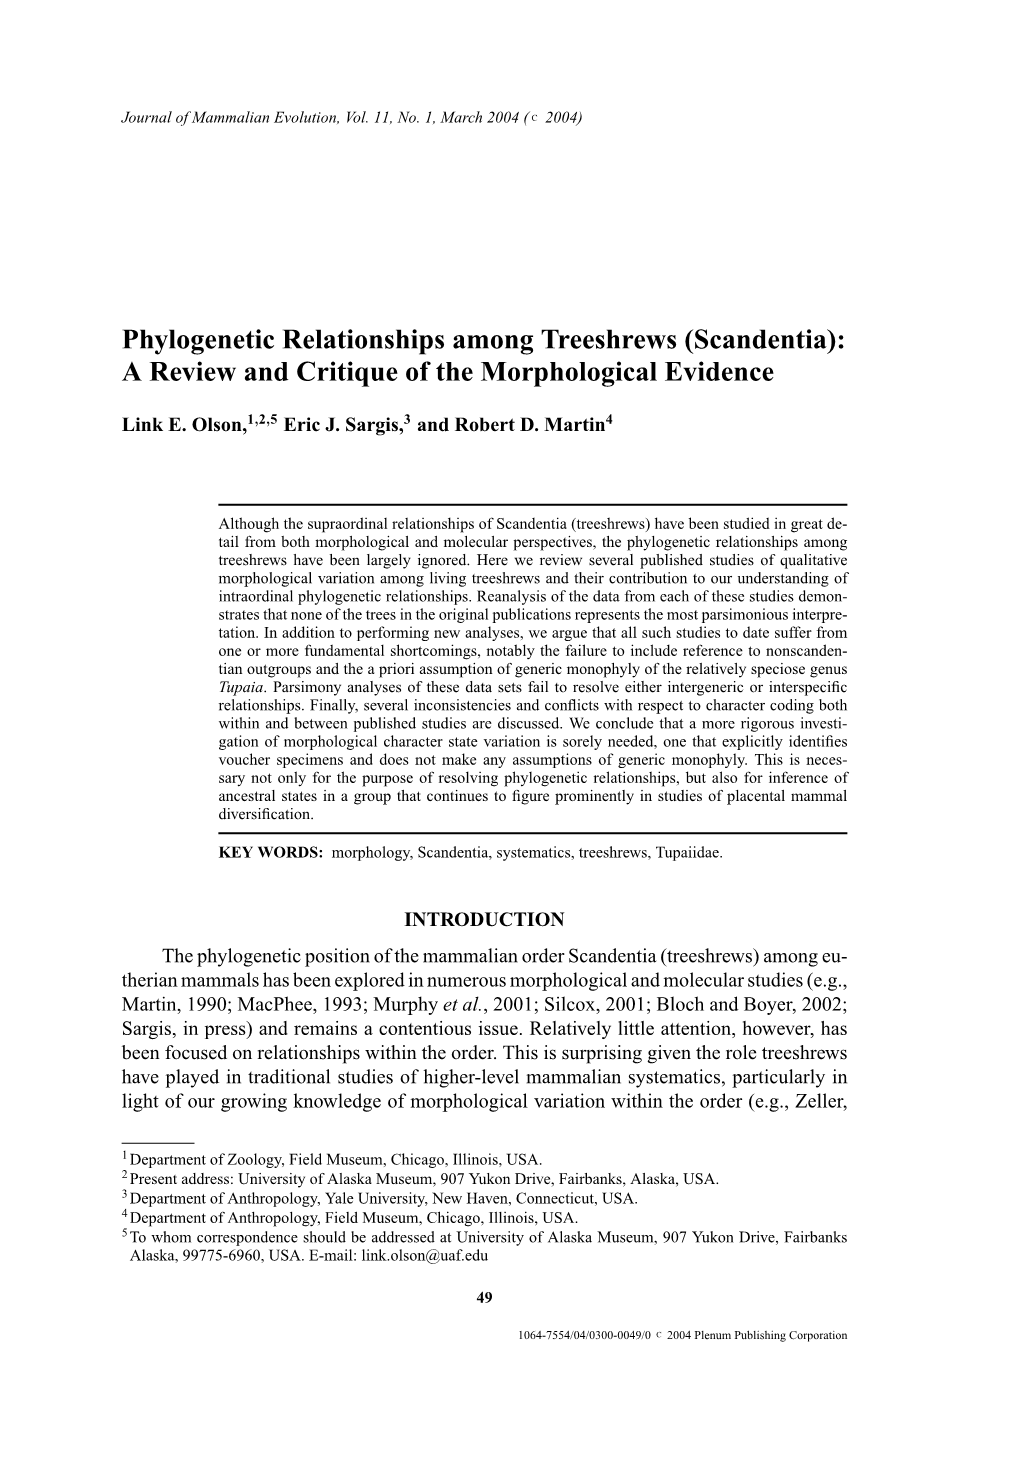 Phylogenetic Relationships Among Treeshrews (Scandentia): a Review and Critique of the Morphological Evidence